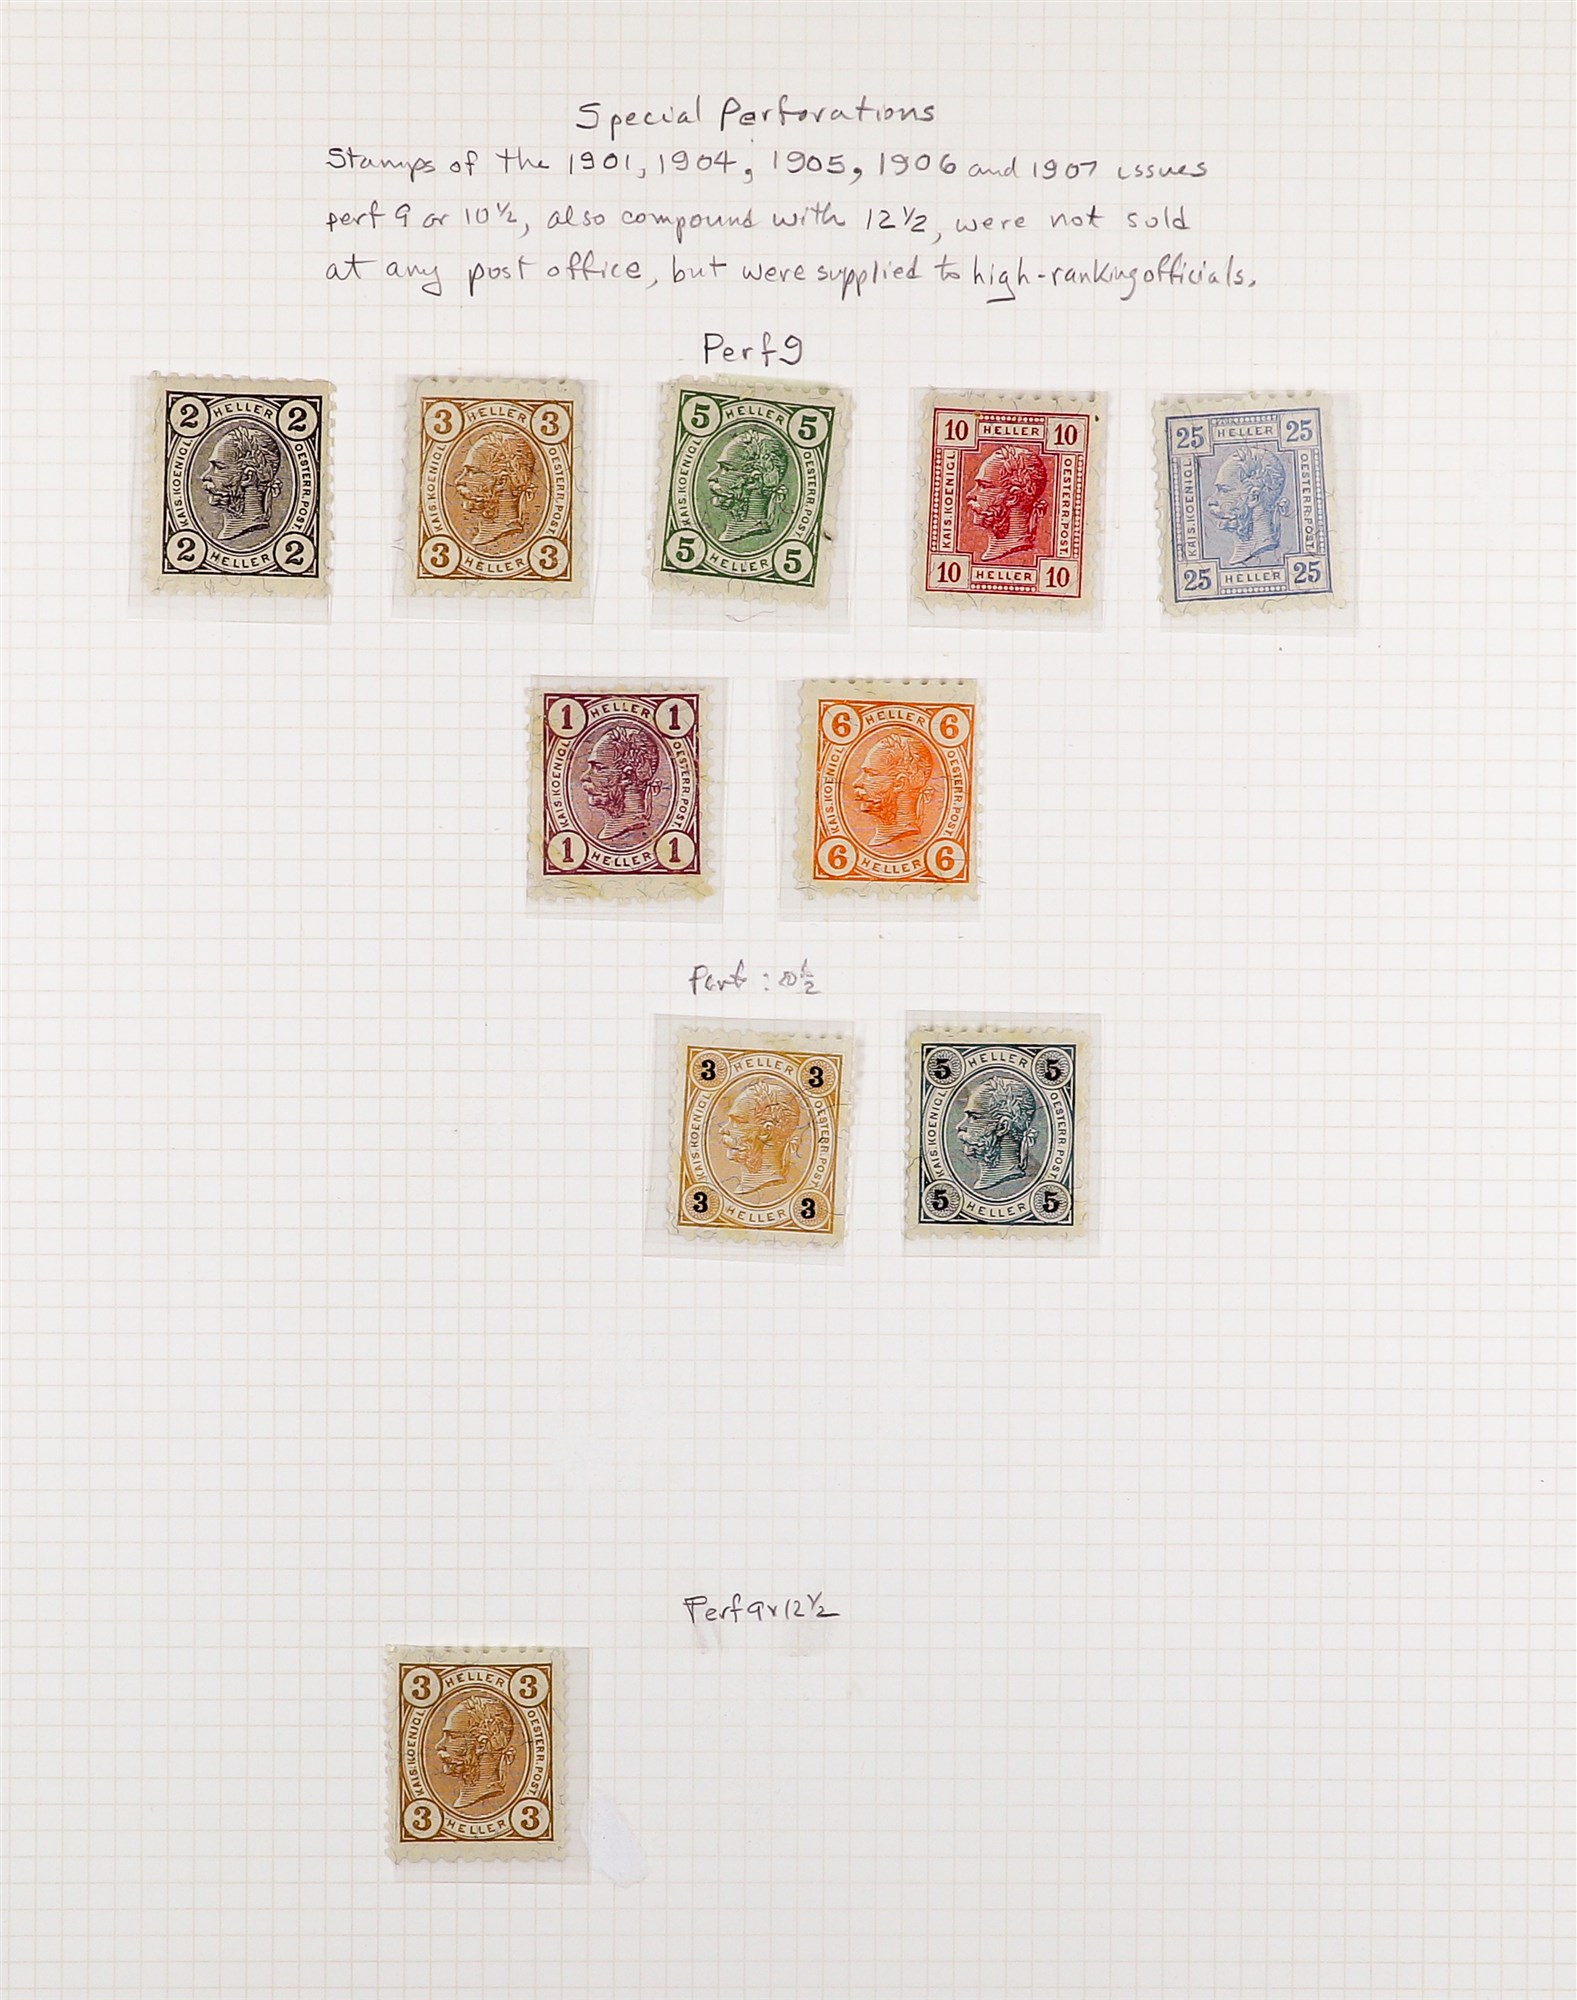 AUSTRIA 1890 - 1907 FRANZ JOSEF DEFINITIVES collection of over 180 mint / some never hinged mint - Image 10 of 11